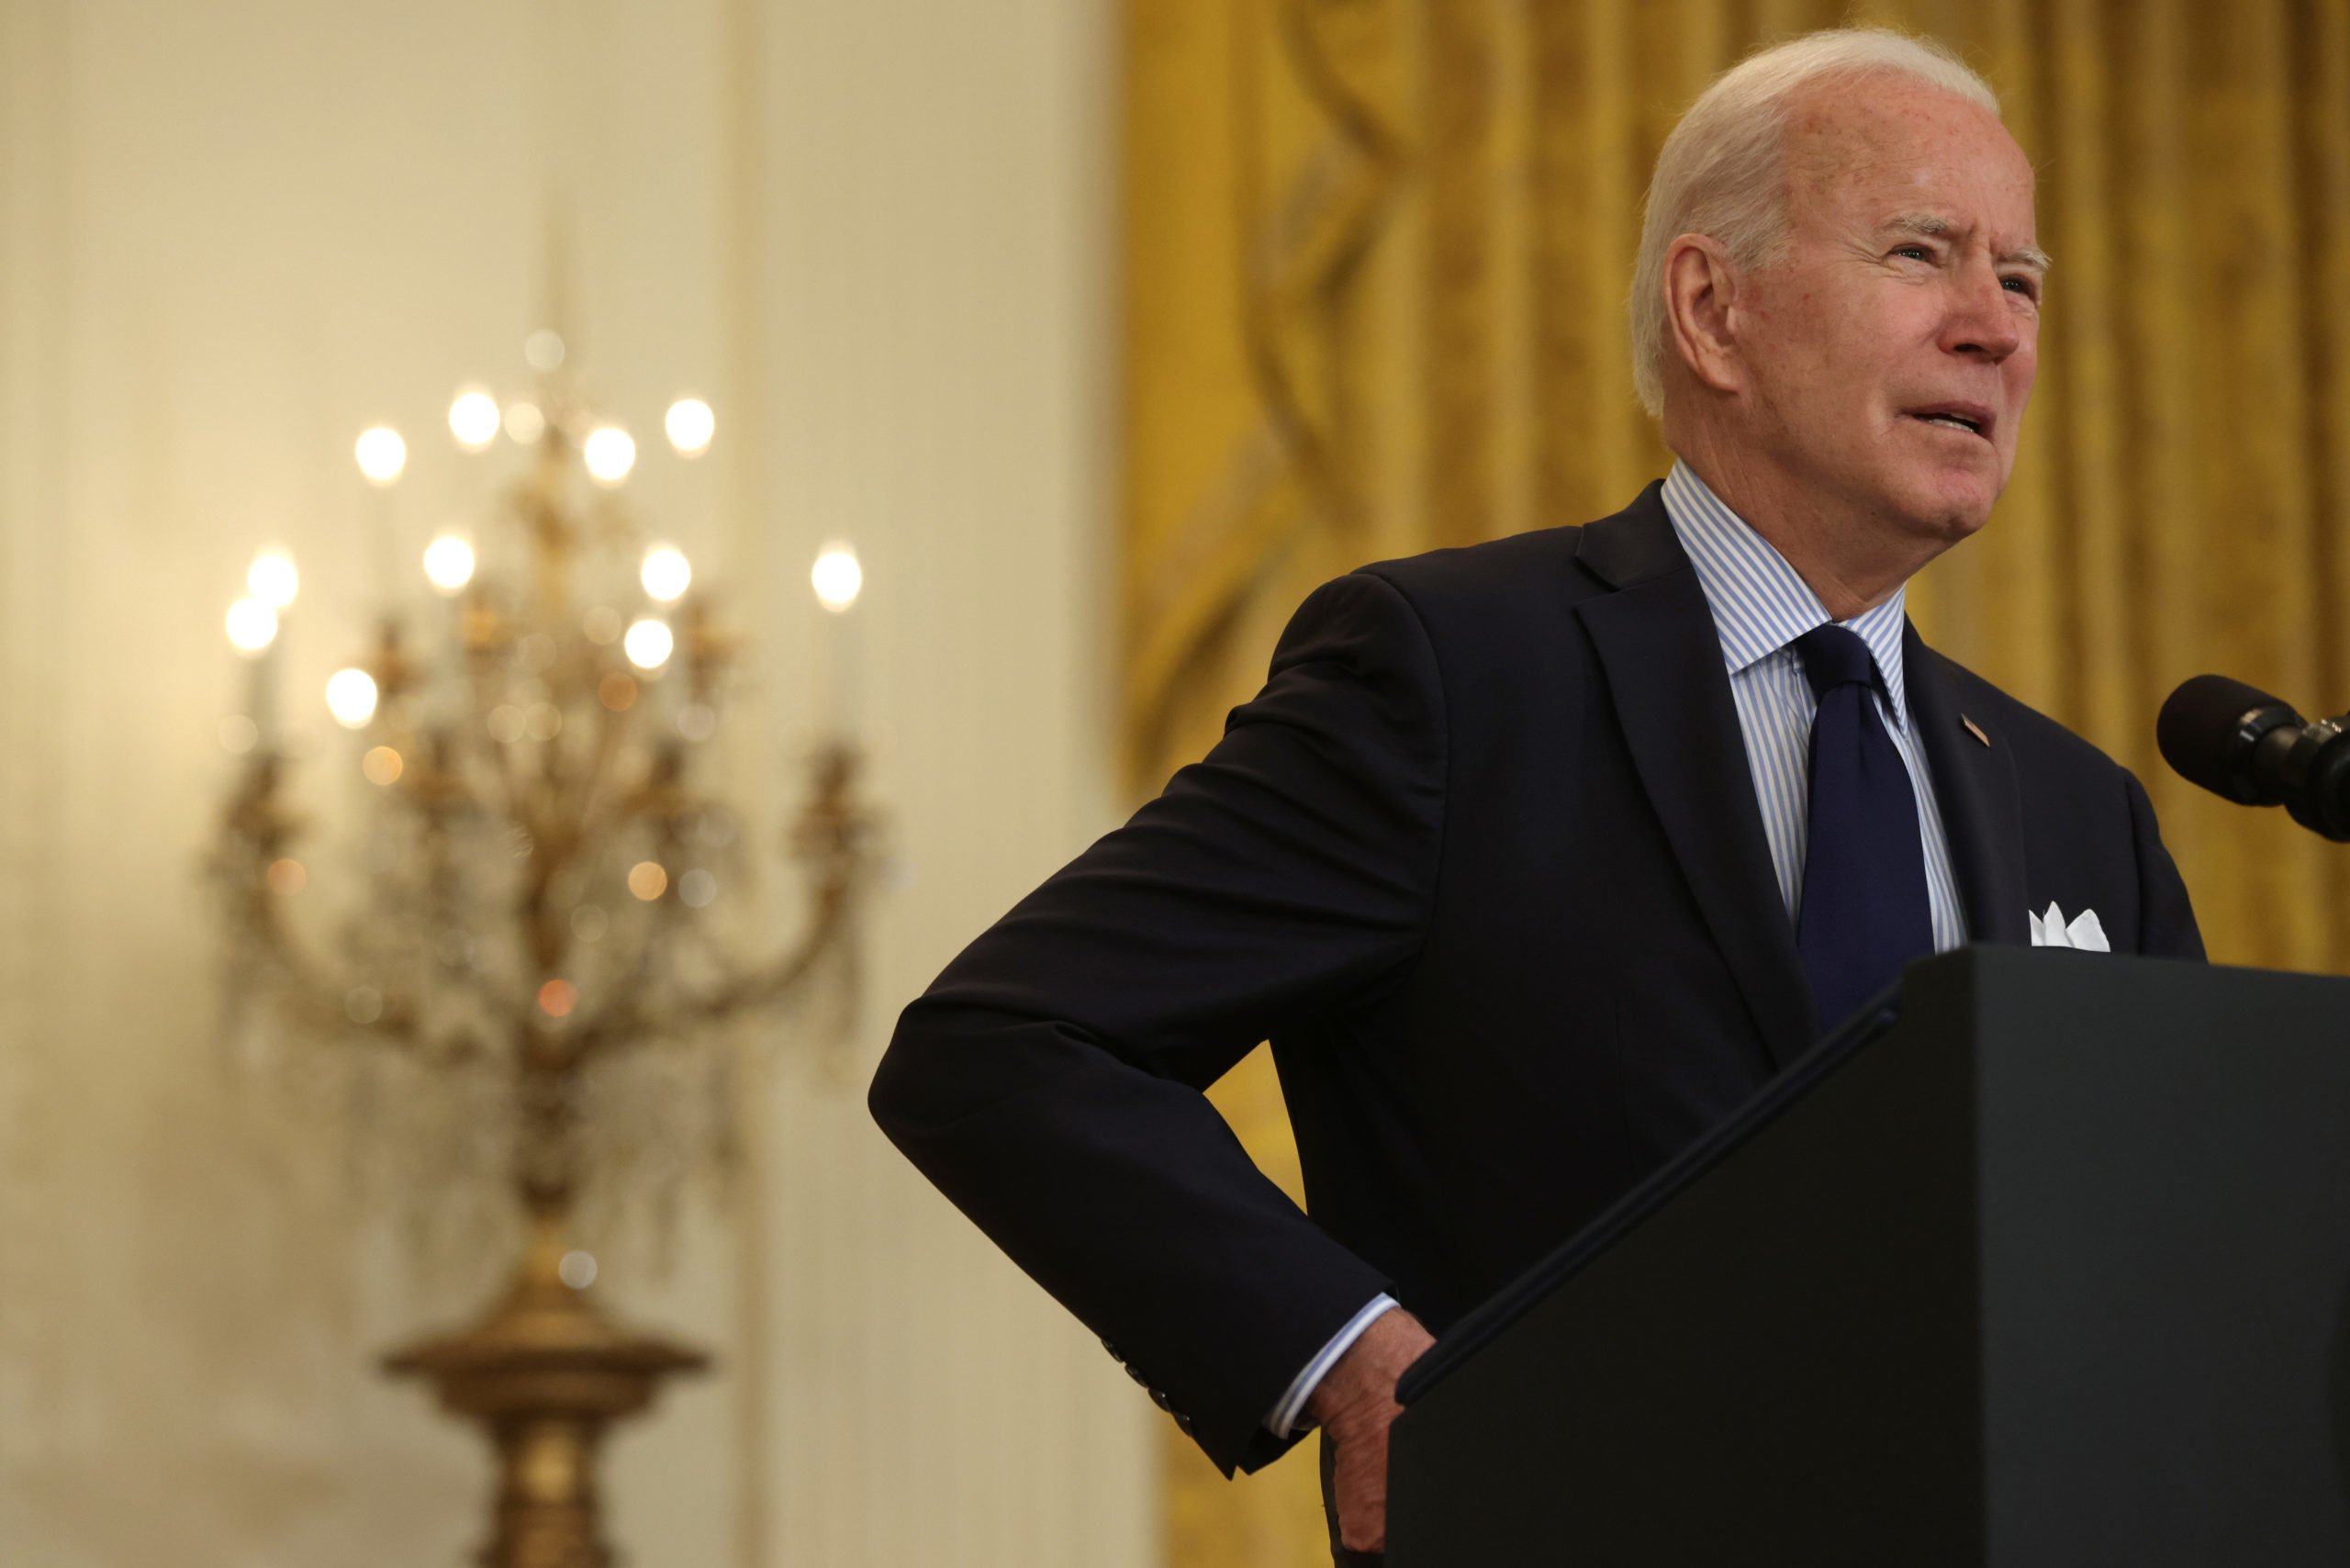 U.S. President Joe Biden speaks on job numbers from April, 2021 at the East Room of the White House May 7, 2021. (Photo by Alex Wong/Getty Images)